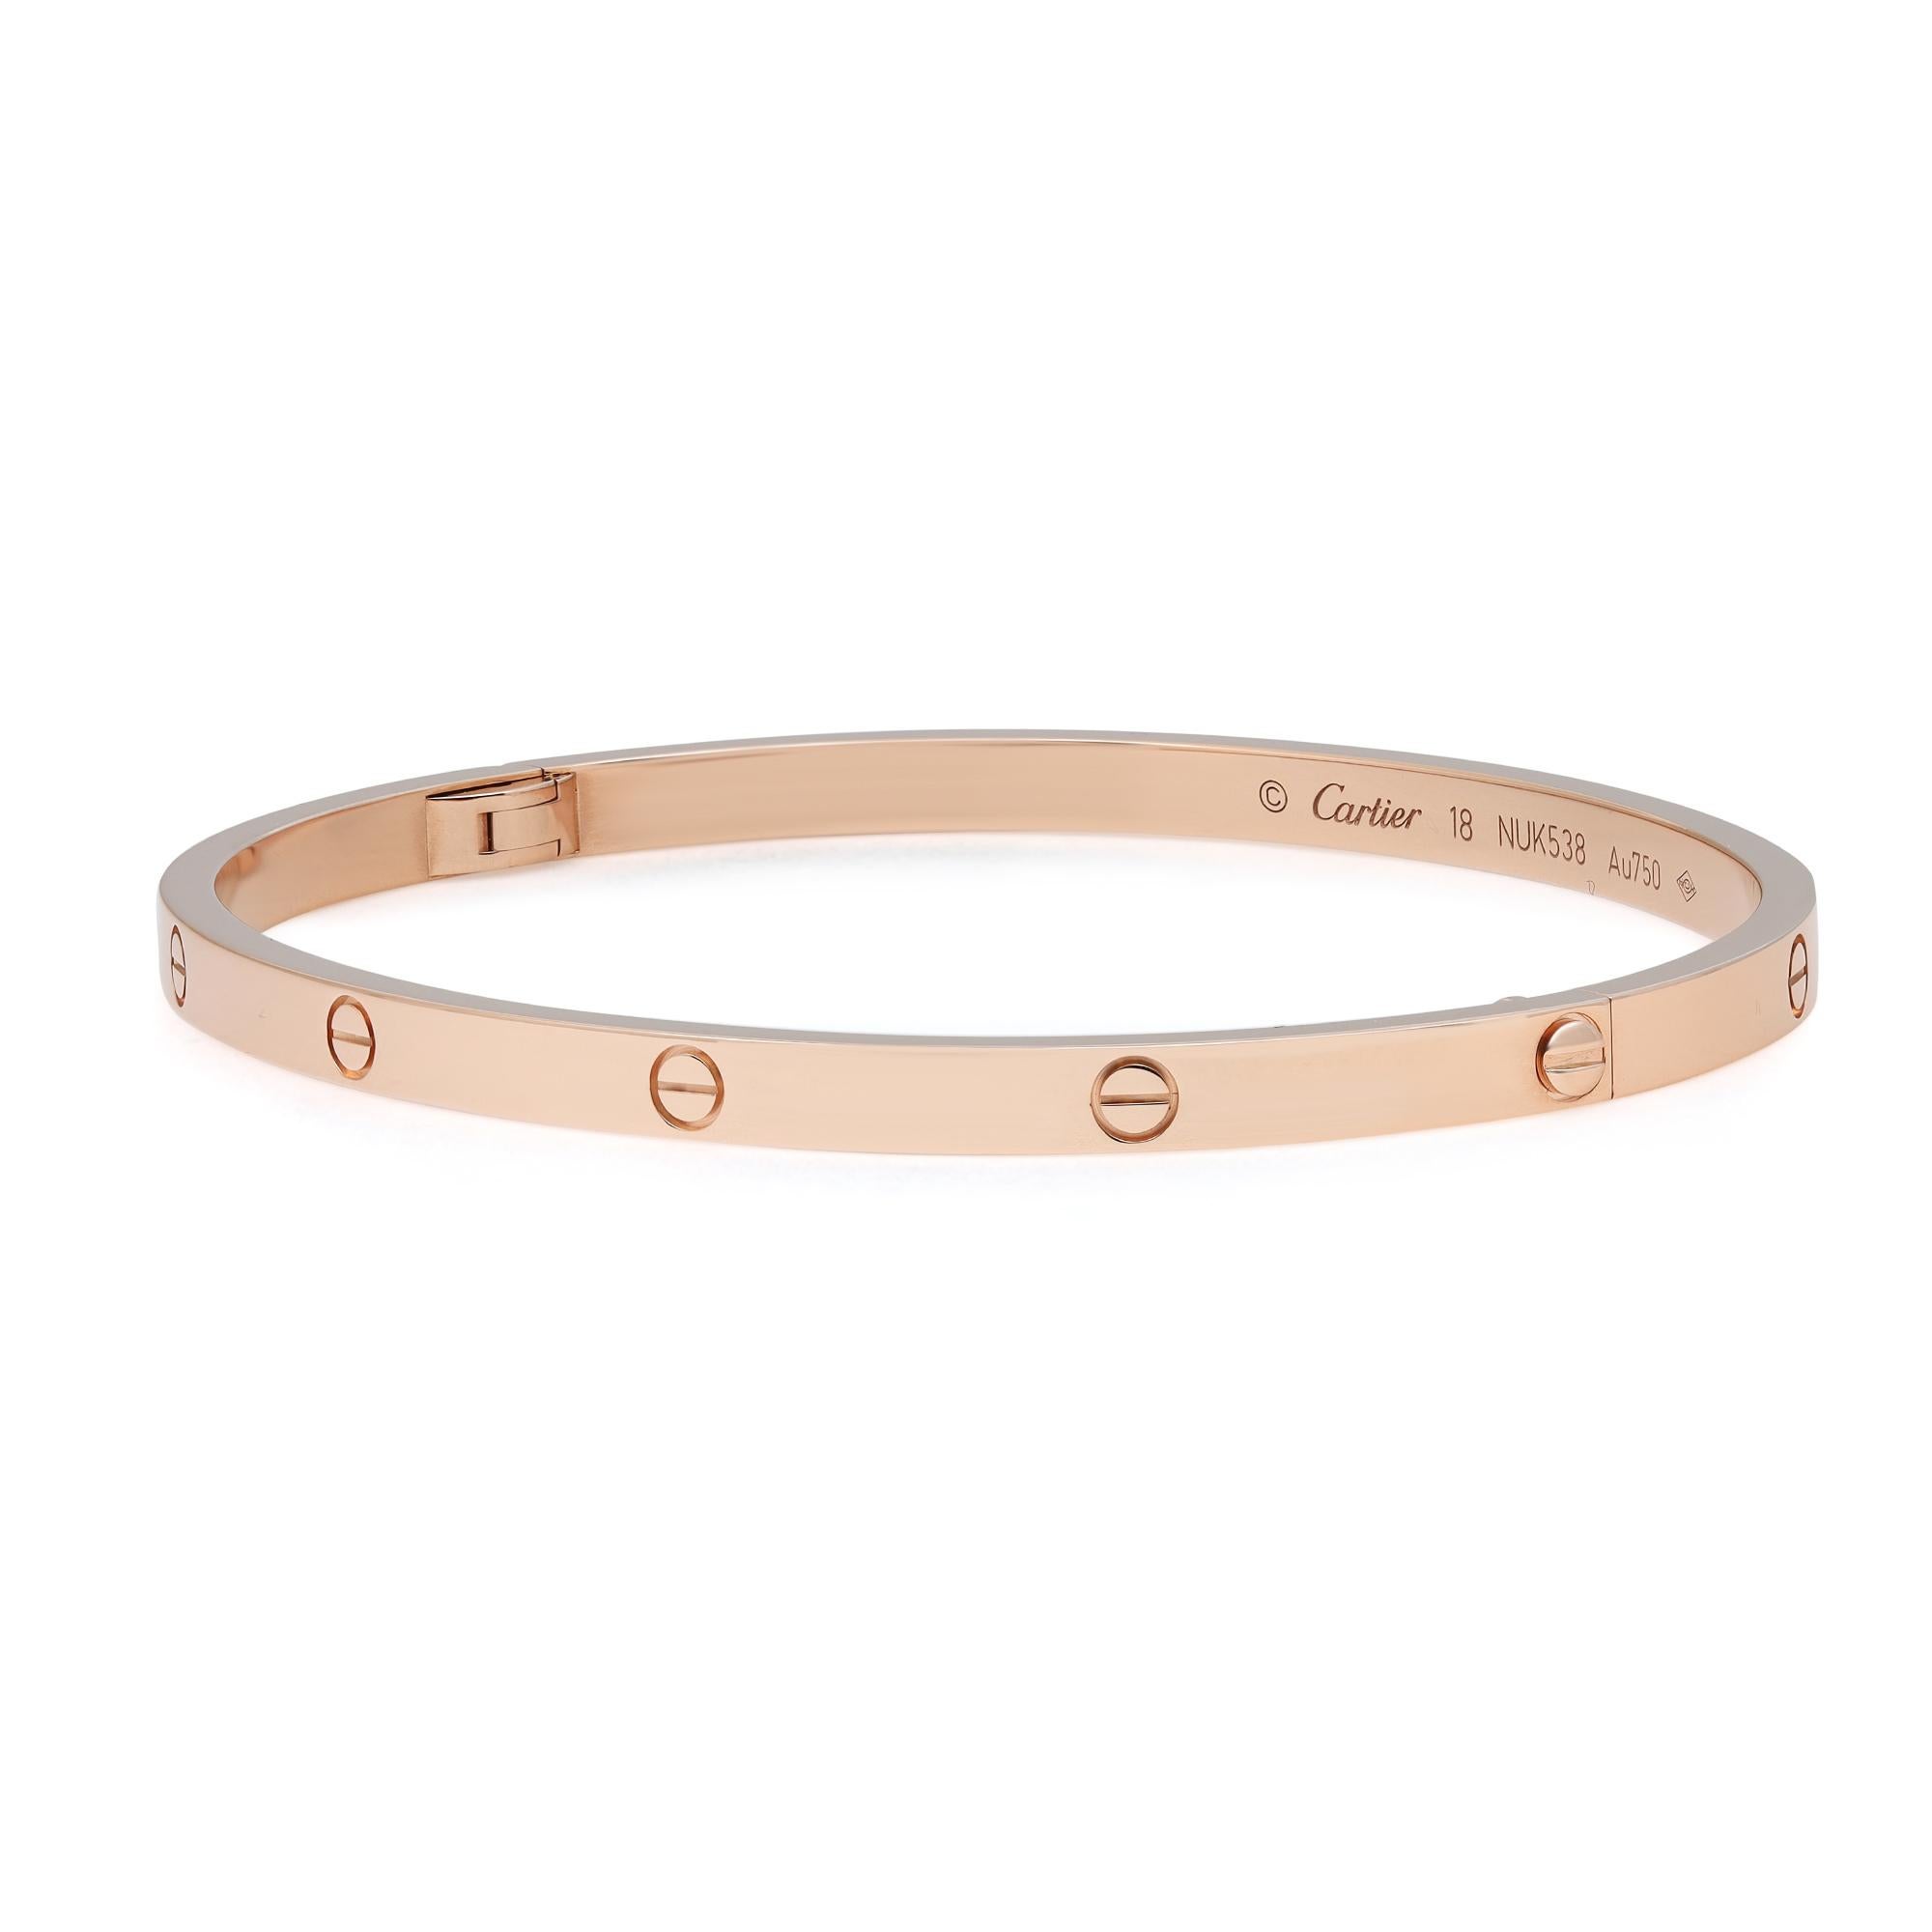 Cartier Love bracelet small model. Crafted in 18k rose gold. Width: 3.65 mm. Size 18. Comes with a screwdriver. Unworn condition. The bracelet is marked 